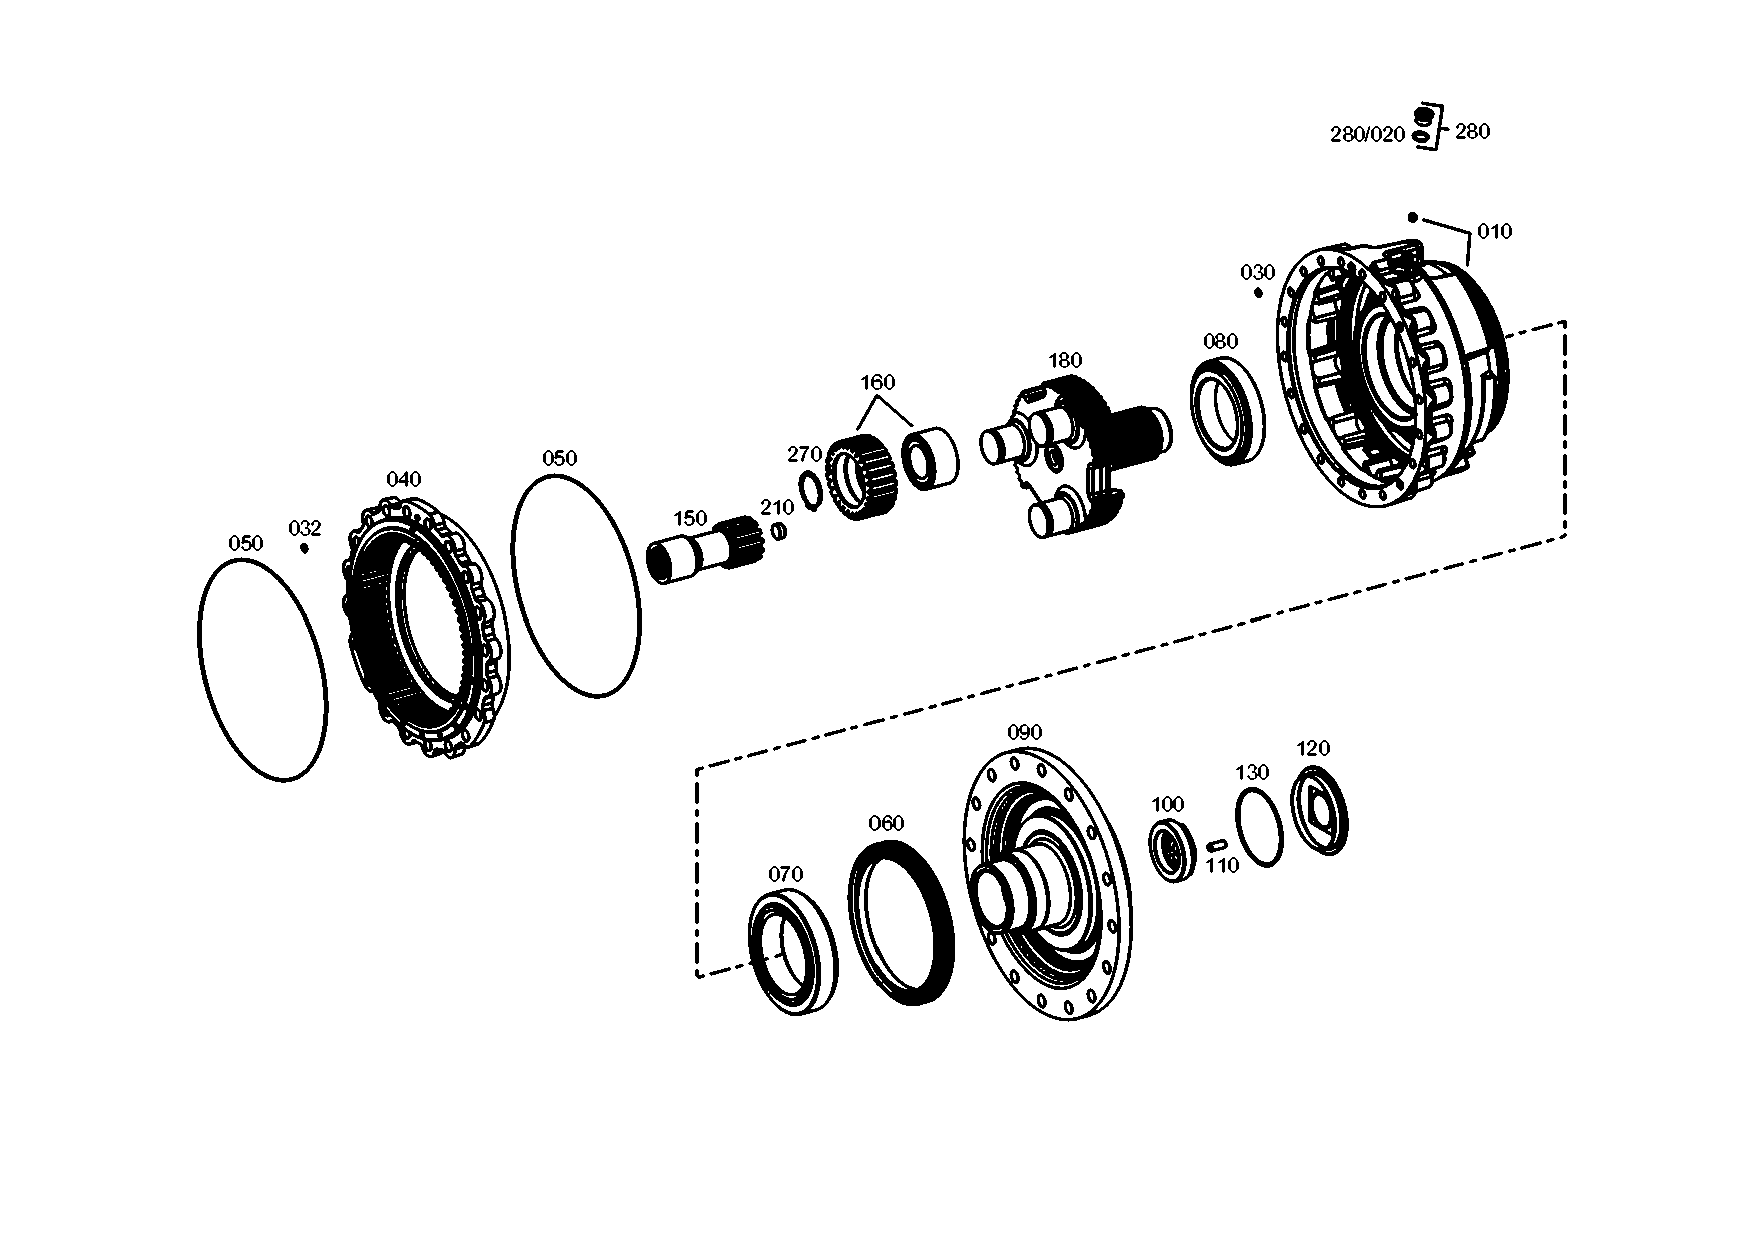 drawing for LIEBHERR GMBH 10032813 - OUTPUT SHAFT (figure 1)